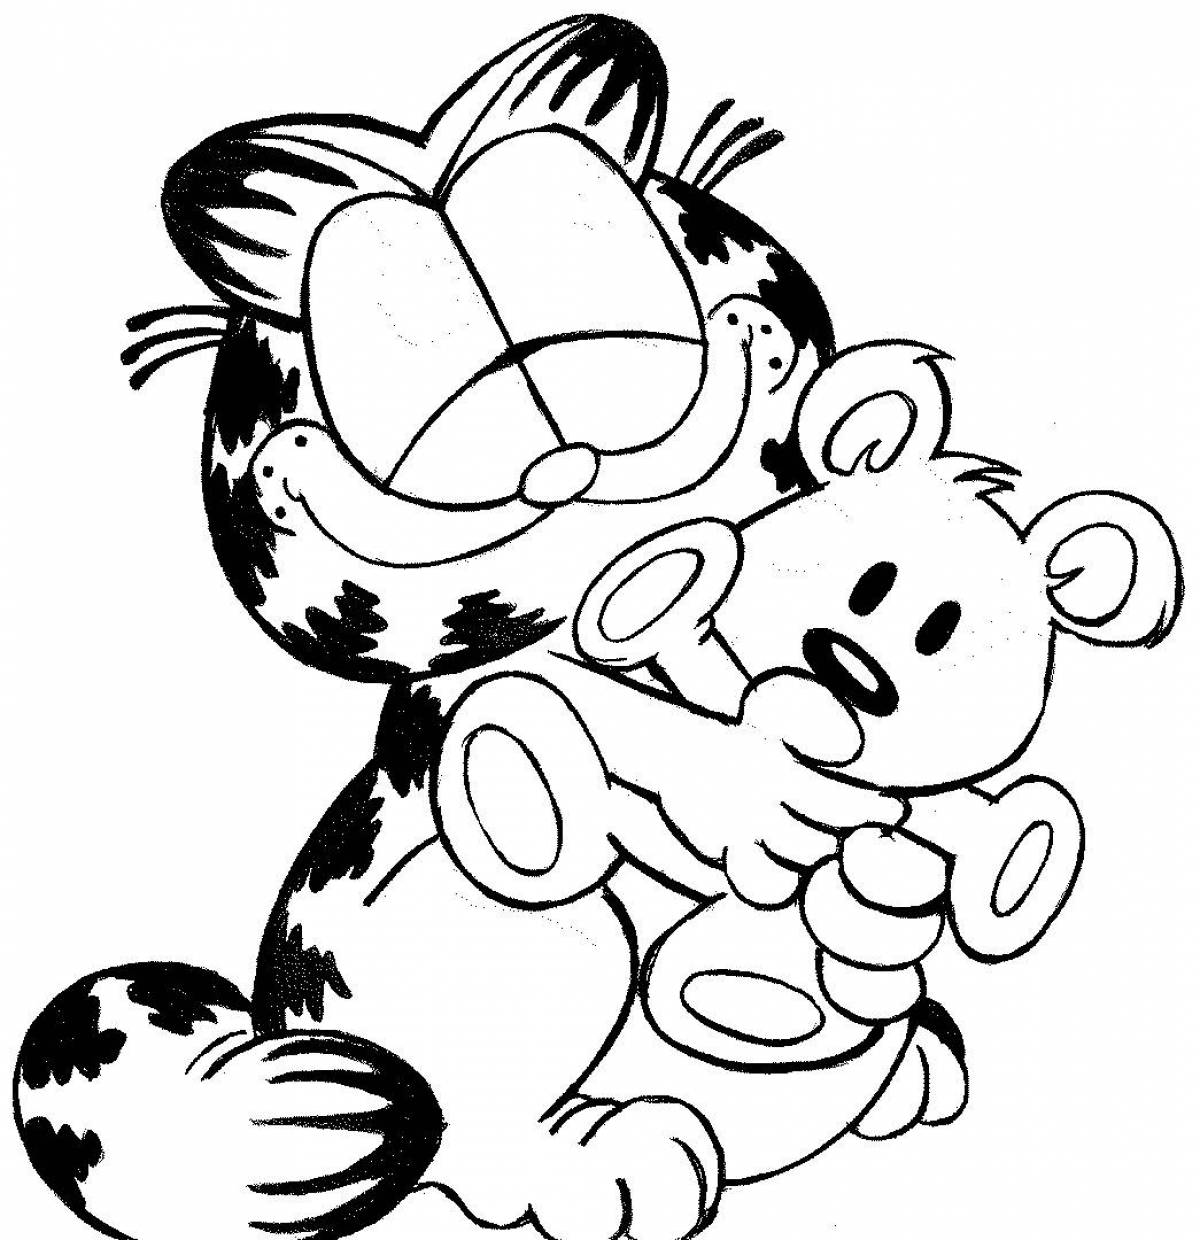 Garfield's amazing coloring page